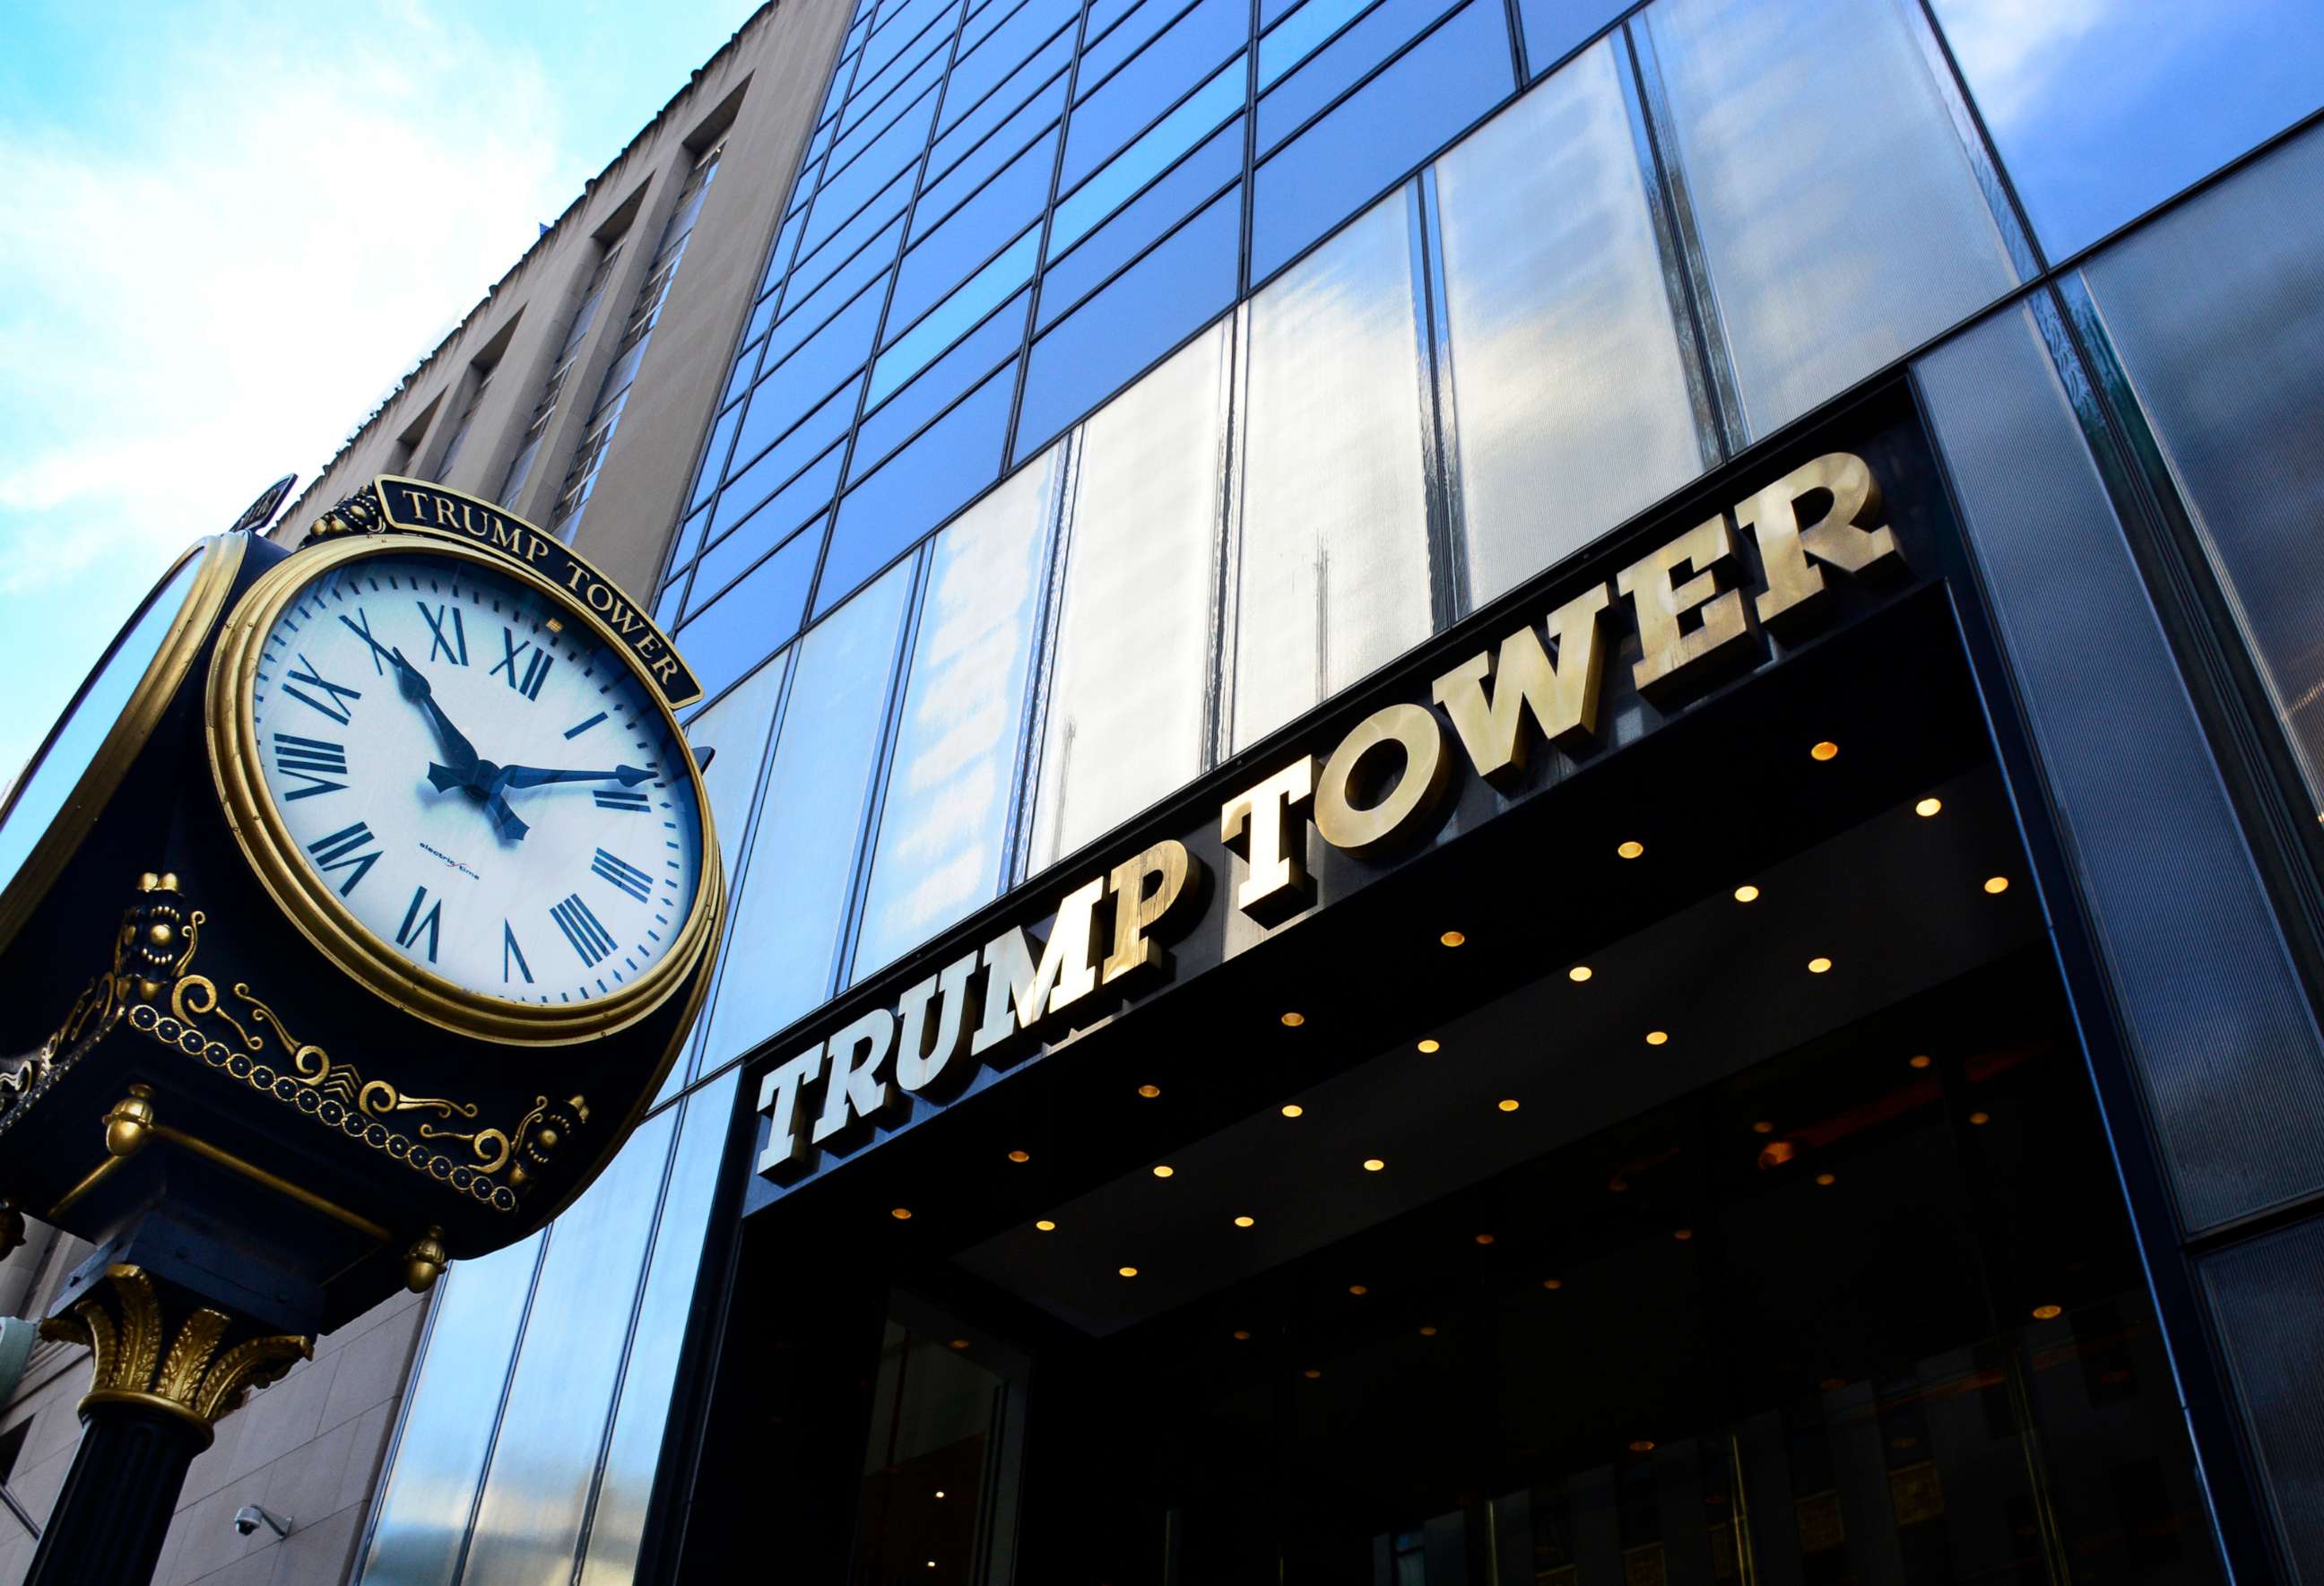 PHOTO: The entrance to Trump Tower on Fifth Avenue in New York City.